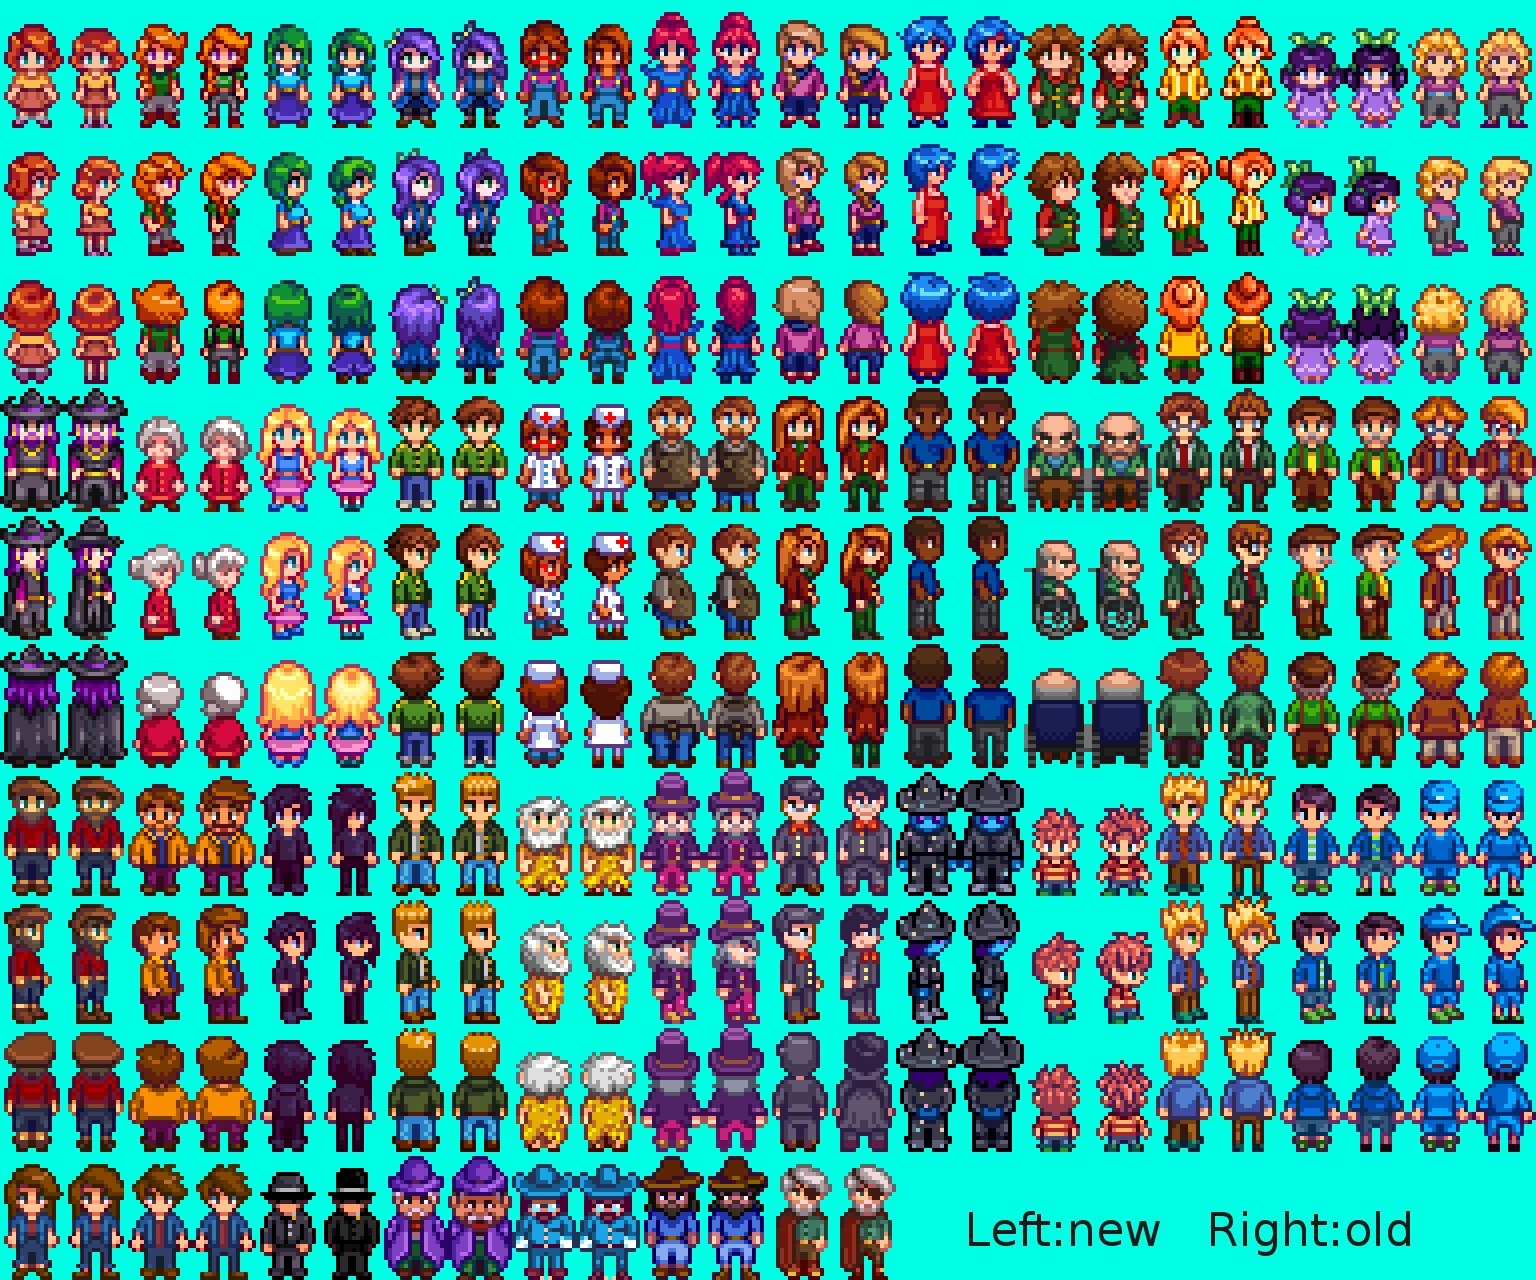 Stardew Valley Character Sprites free images, download Stardew Valley Chara...